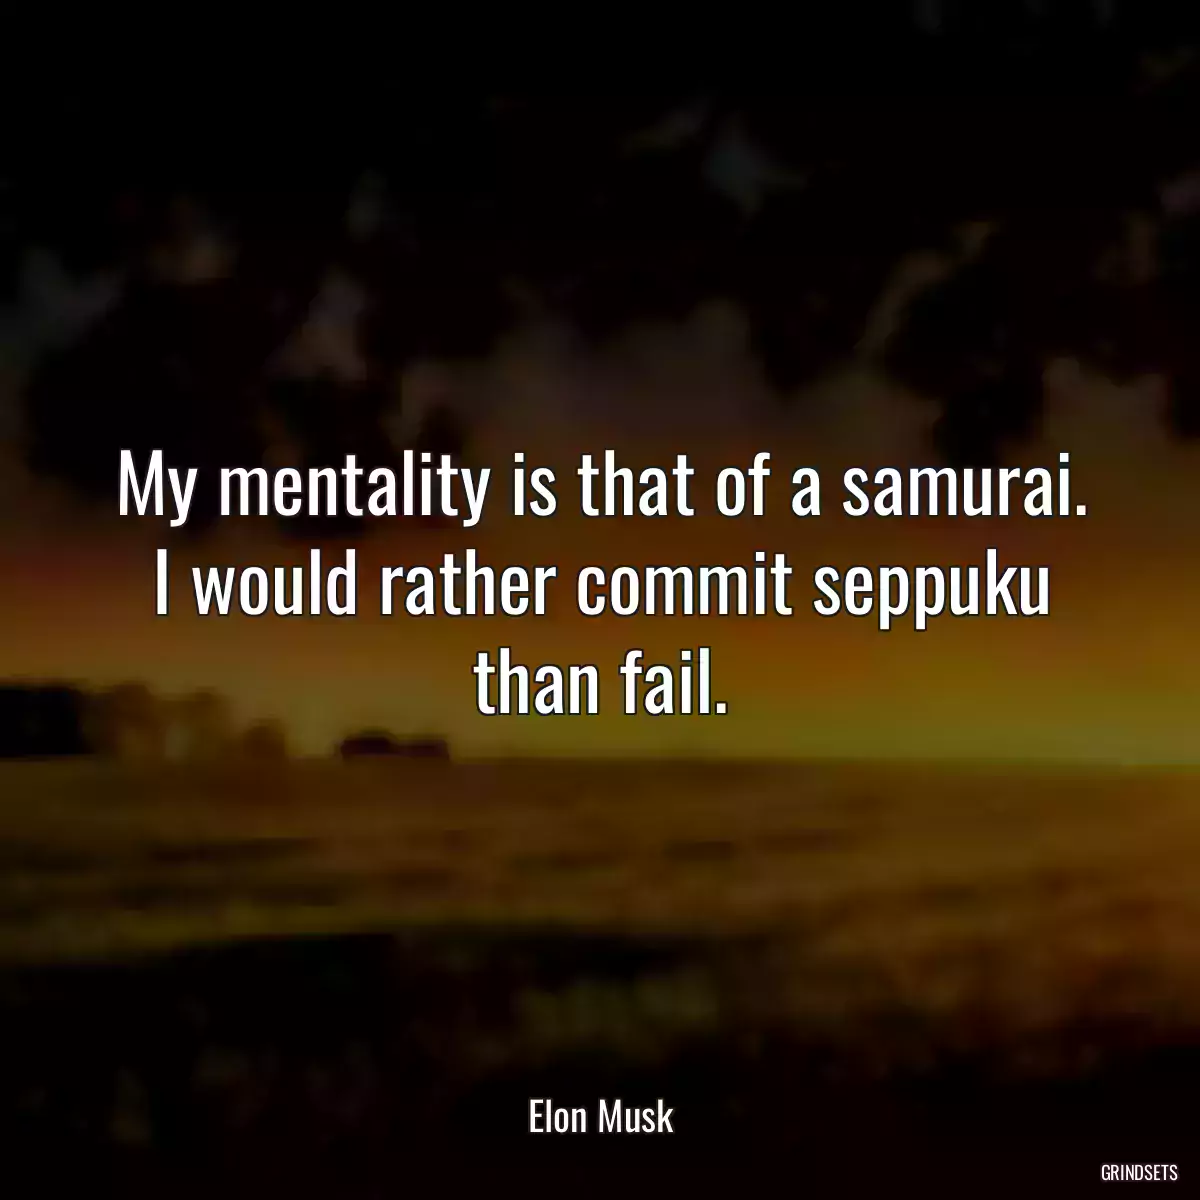 My mentality is that of a samurai. I would rather commit seppuku than fail.